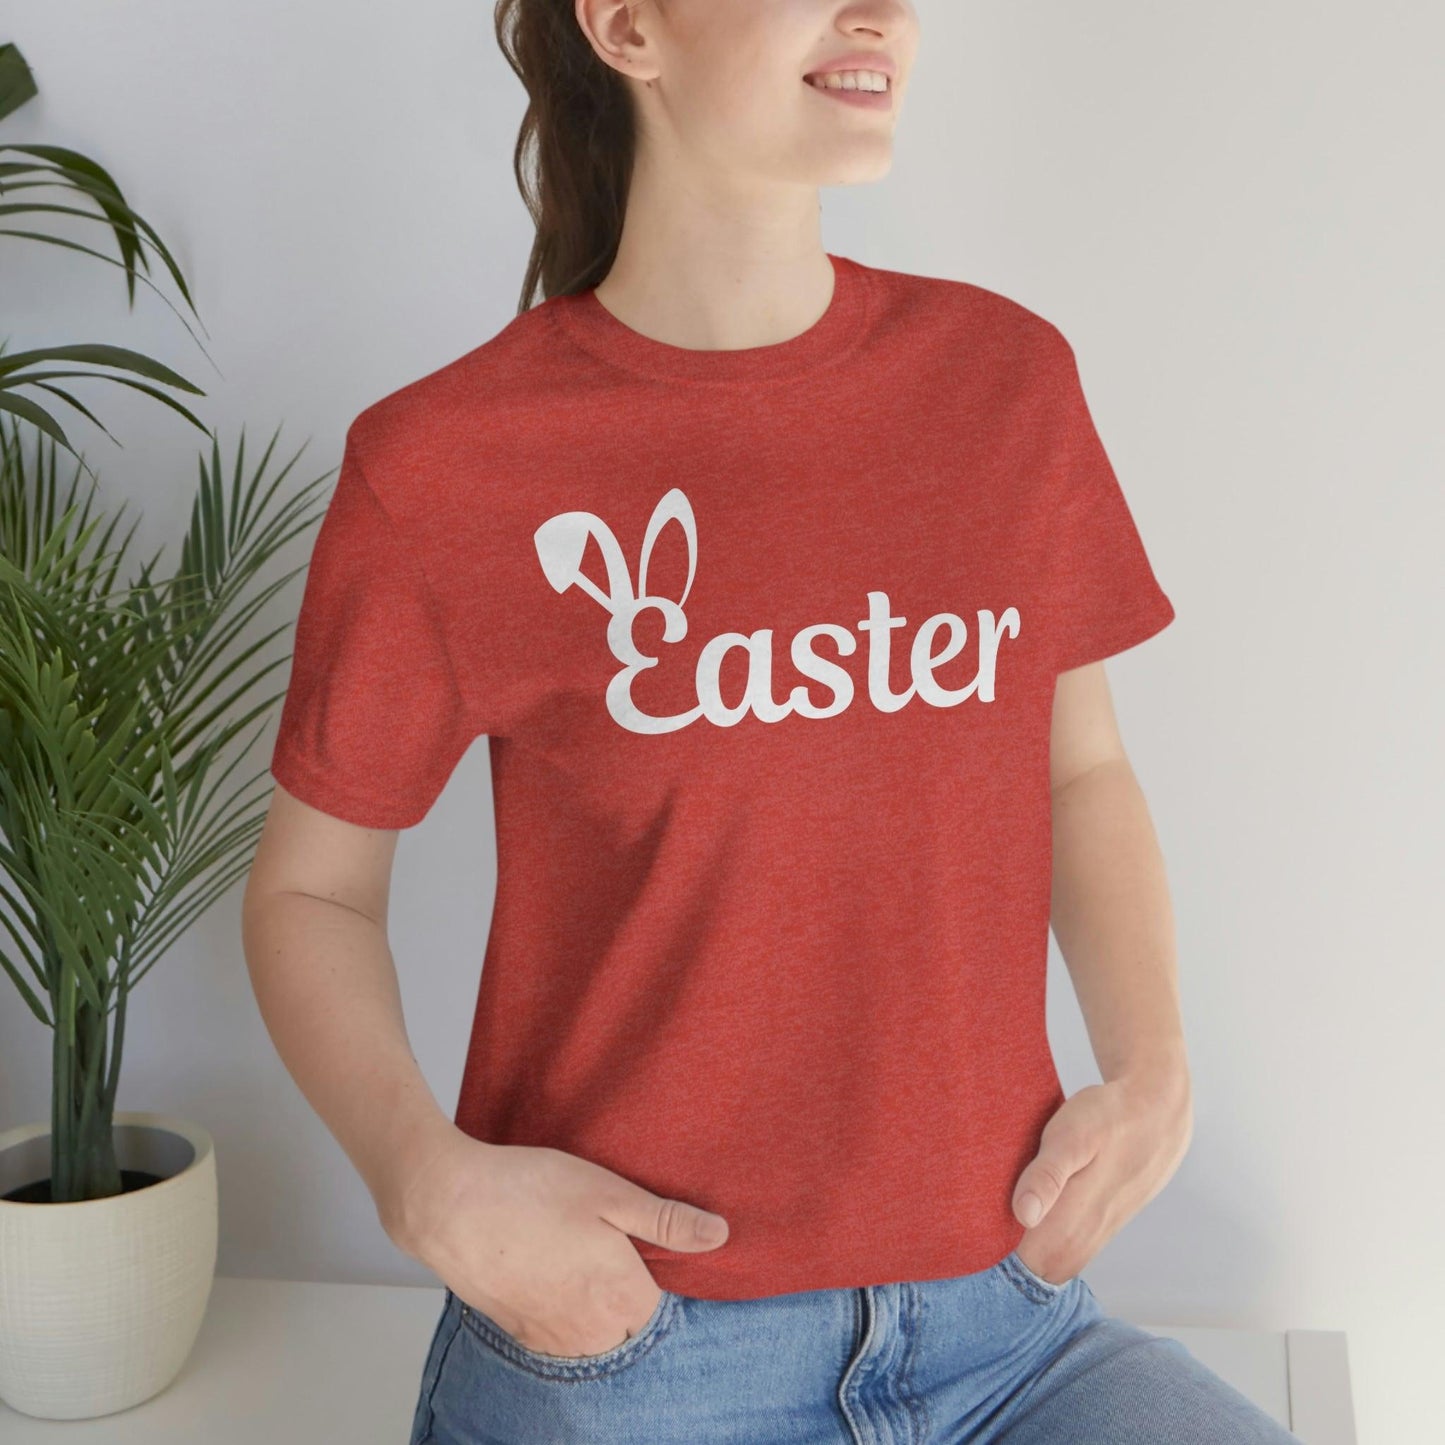 Easter bunny shirt Easter outfit Happy easter shirt Easter tee - Easter egg hunt shirt easter bunny outfit bunny lover gift Easter tshirt